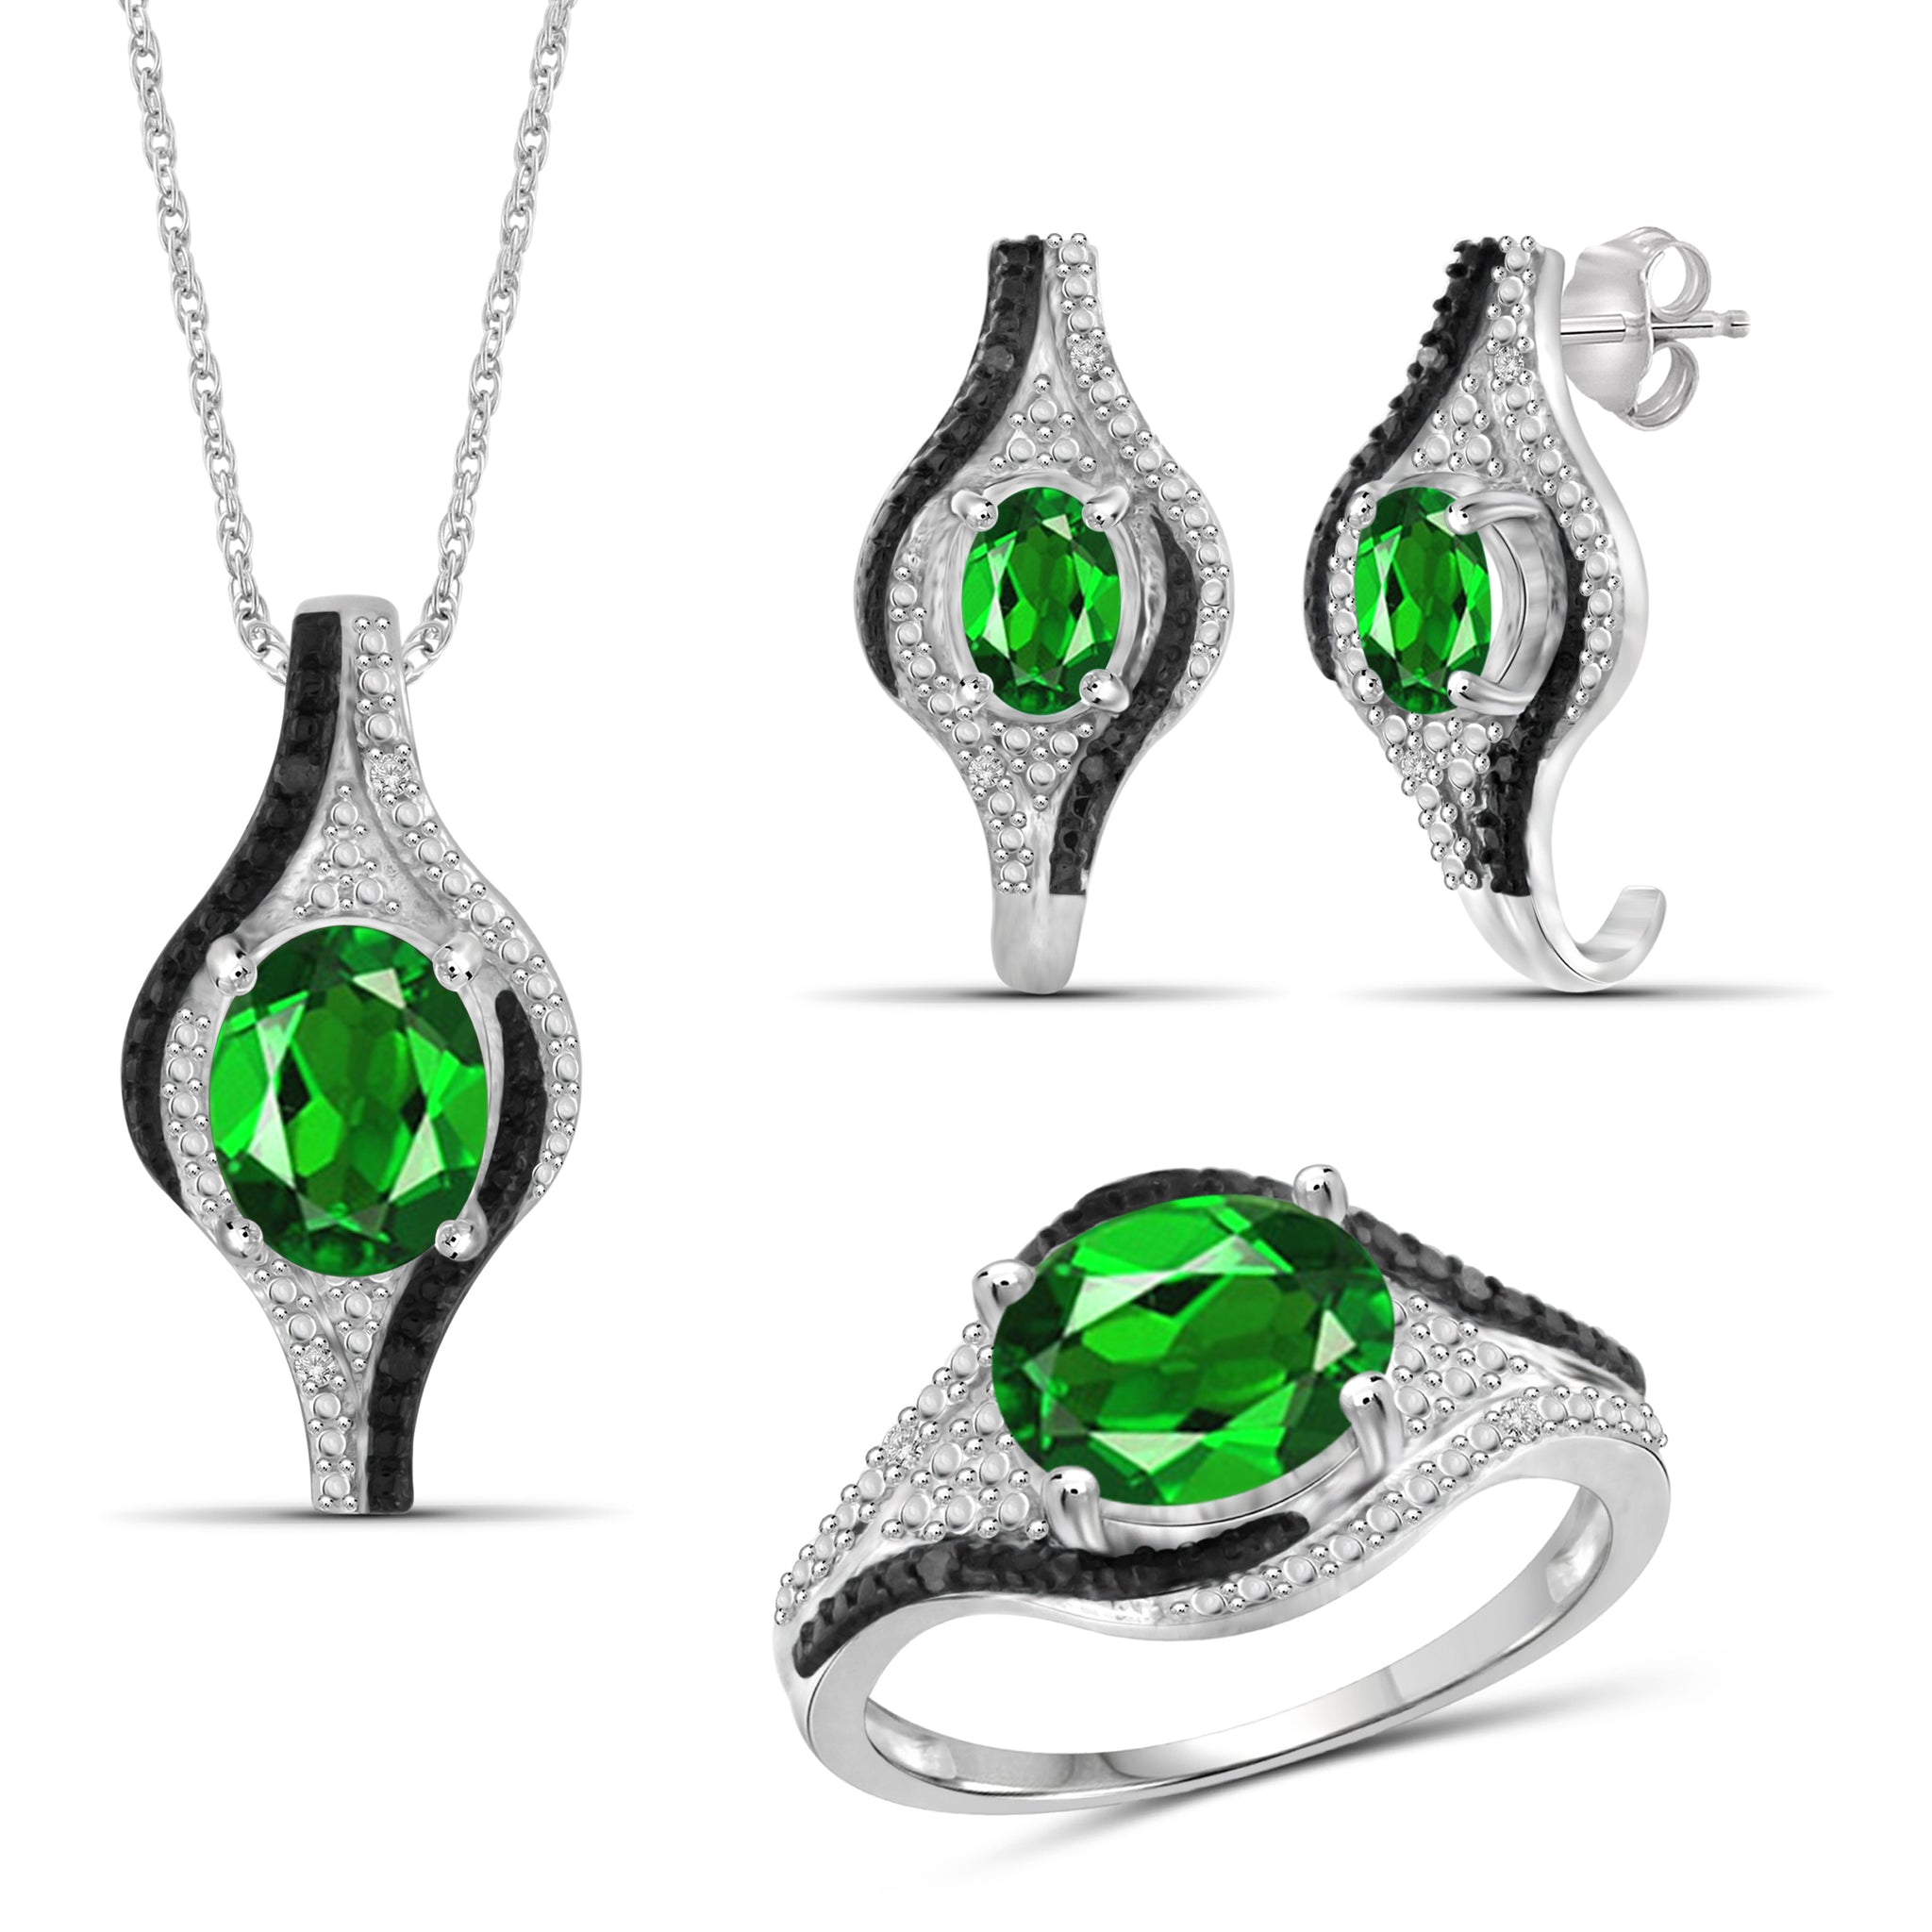 JewelonFire 4.20 Carat T.G.W. Chrome Diopside And 1/10 Carat T.W. Black & White Diamond Sterling Silver 3 Piece Jewelry Set - Assorted Colors